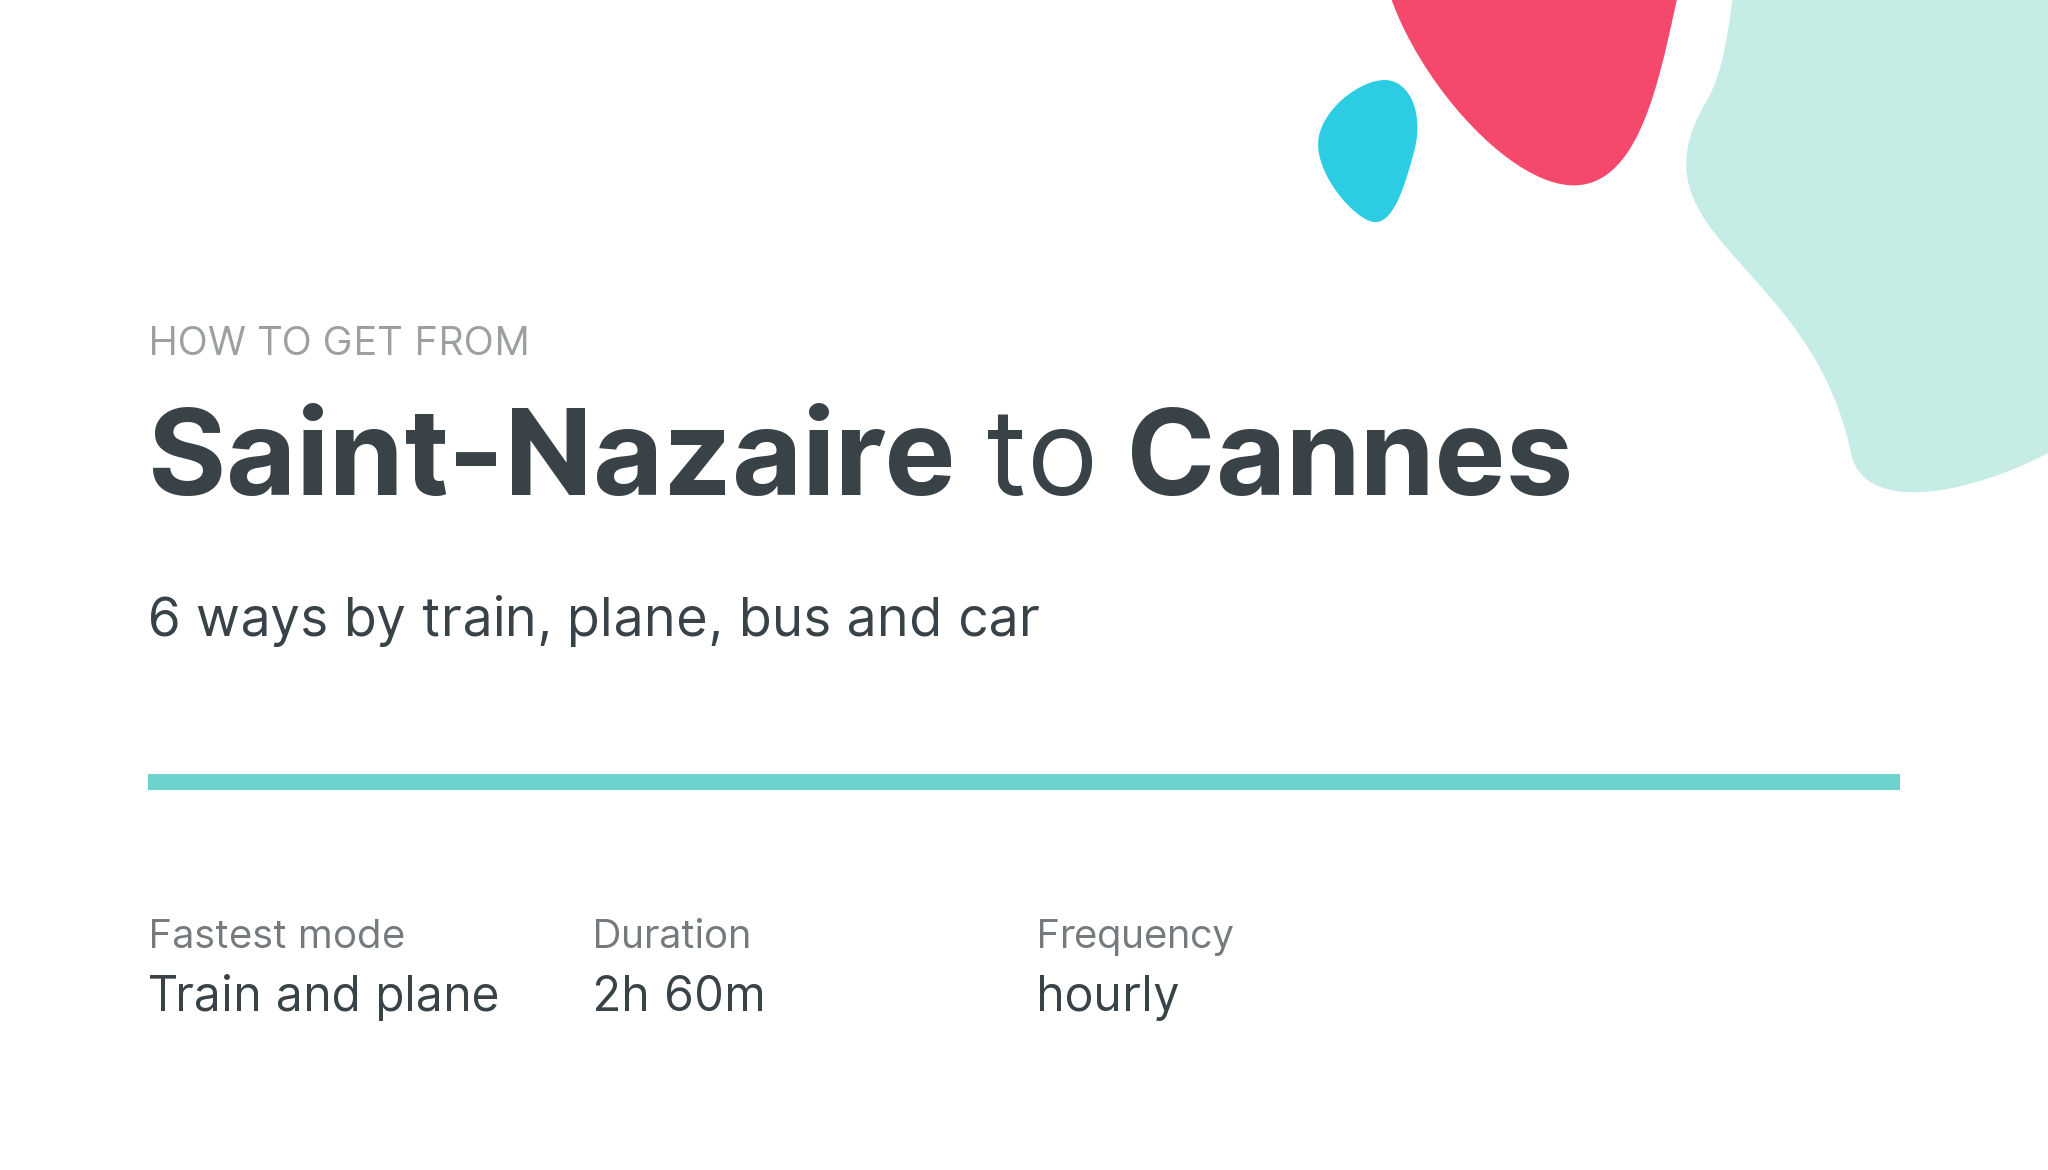 How do I get from Saint-Nazaire to Cannes